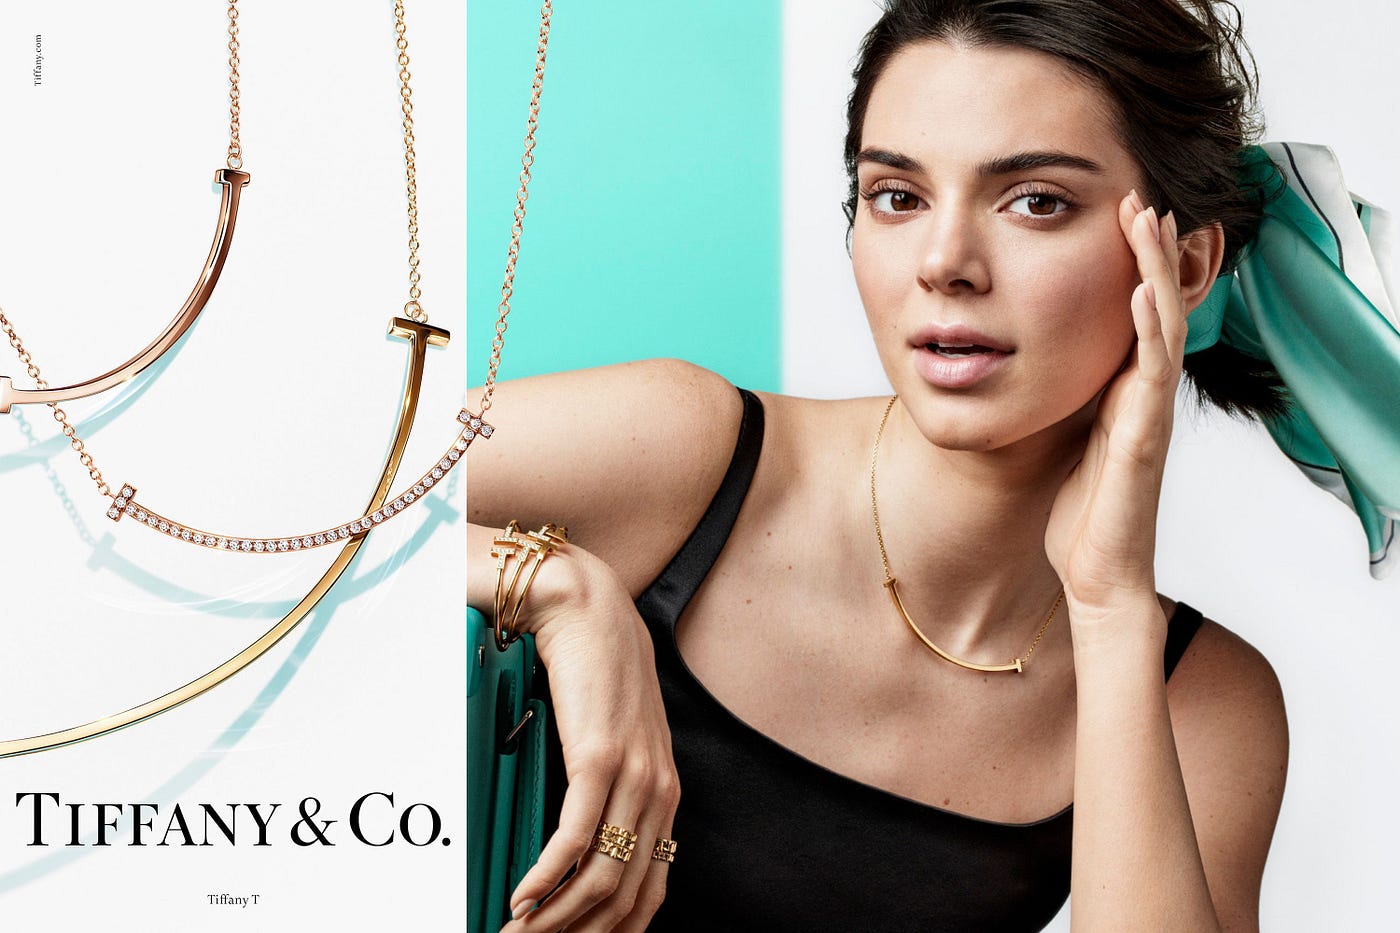 What is Tiffany & Co's marketing strategy?